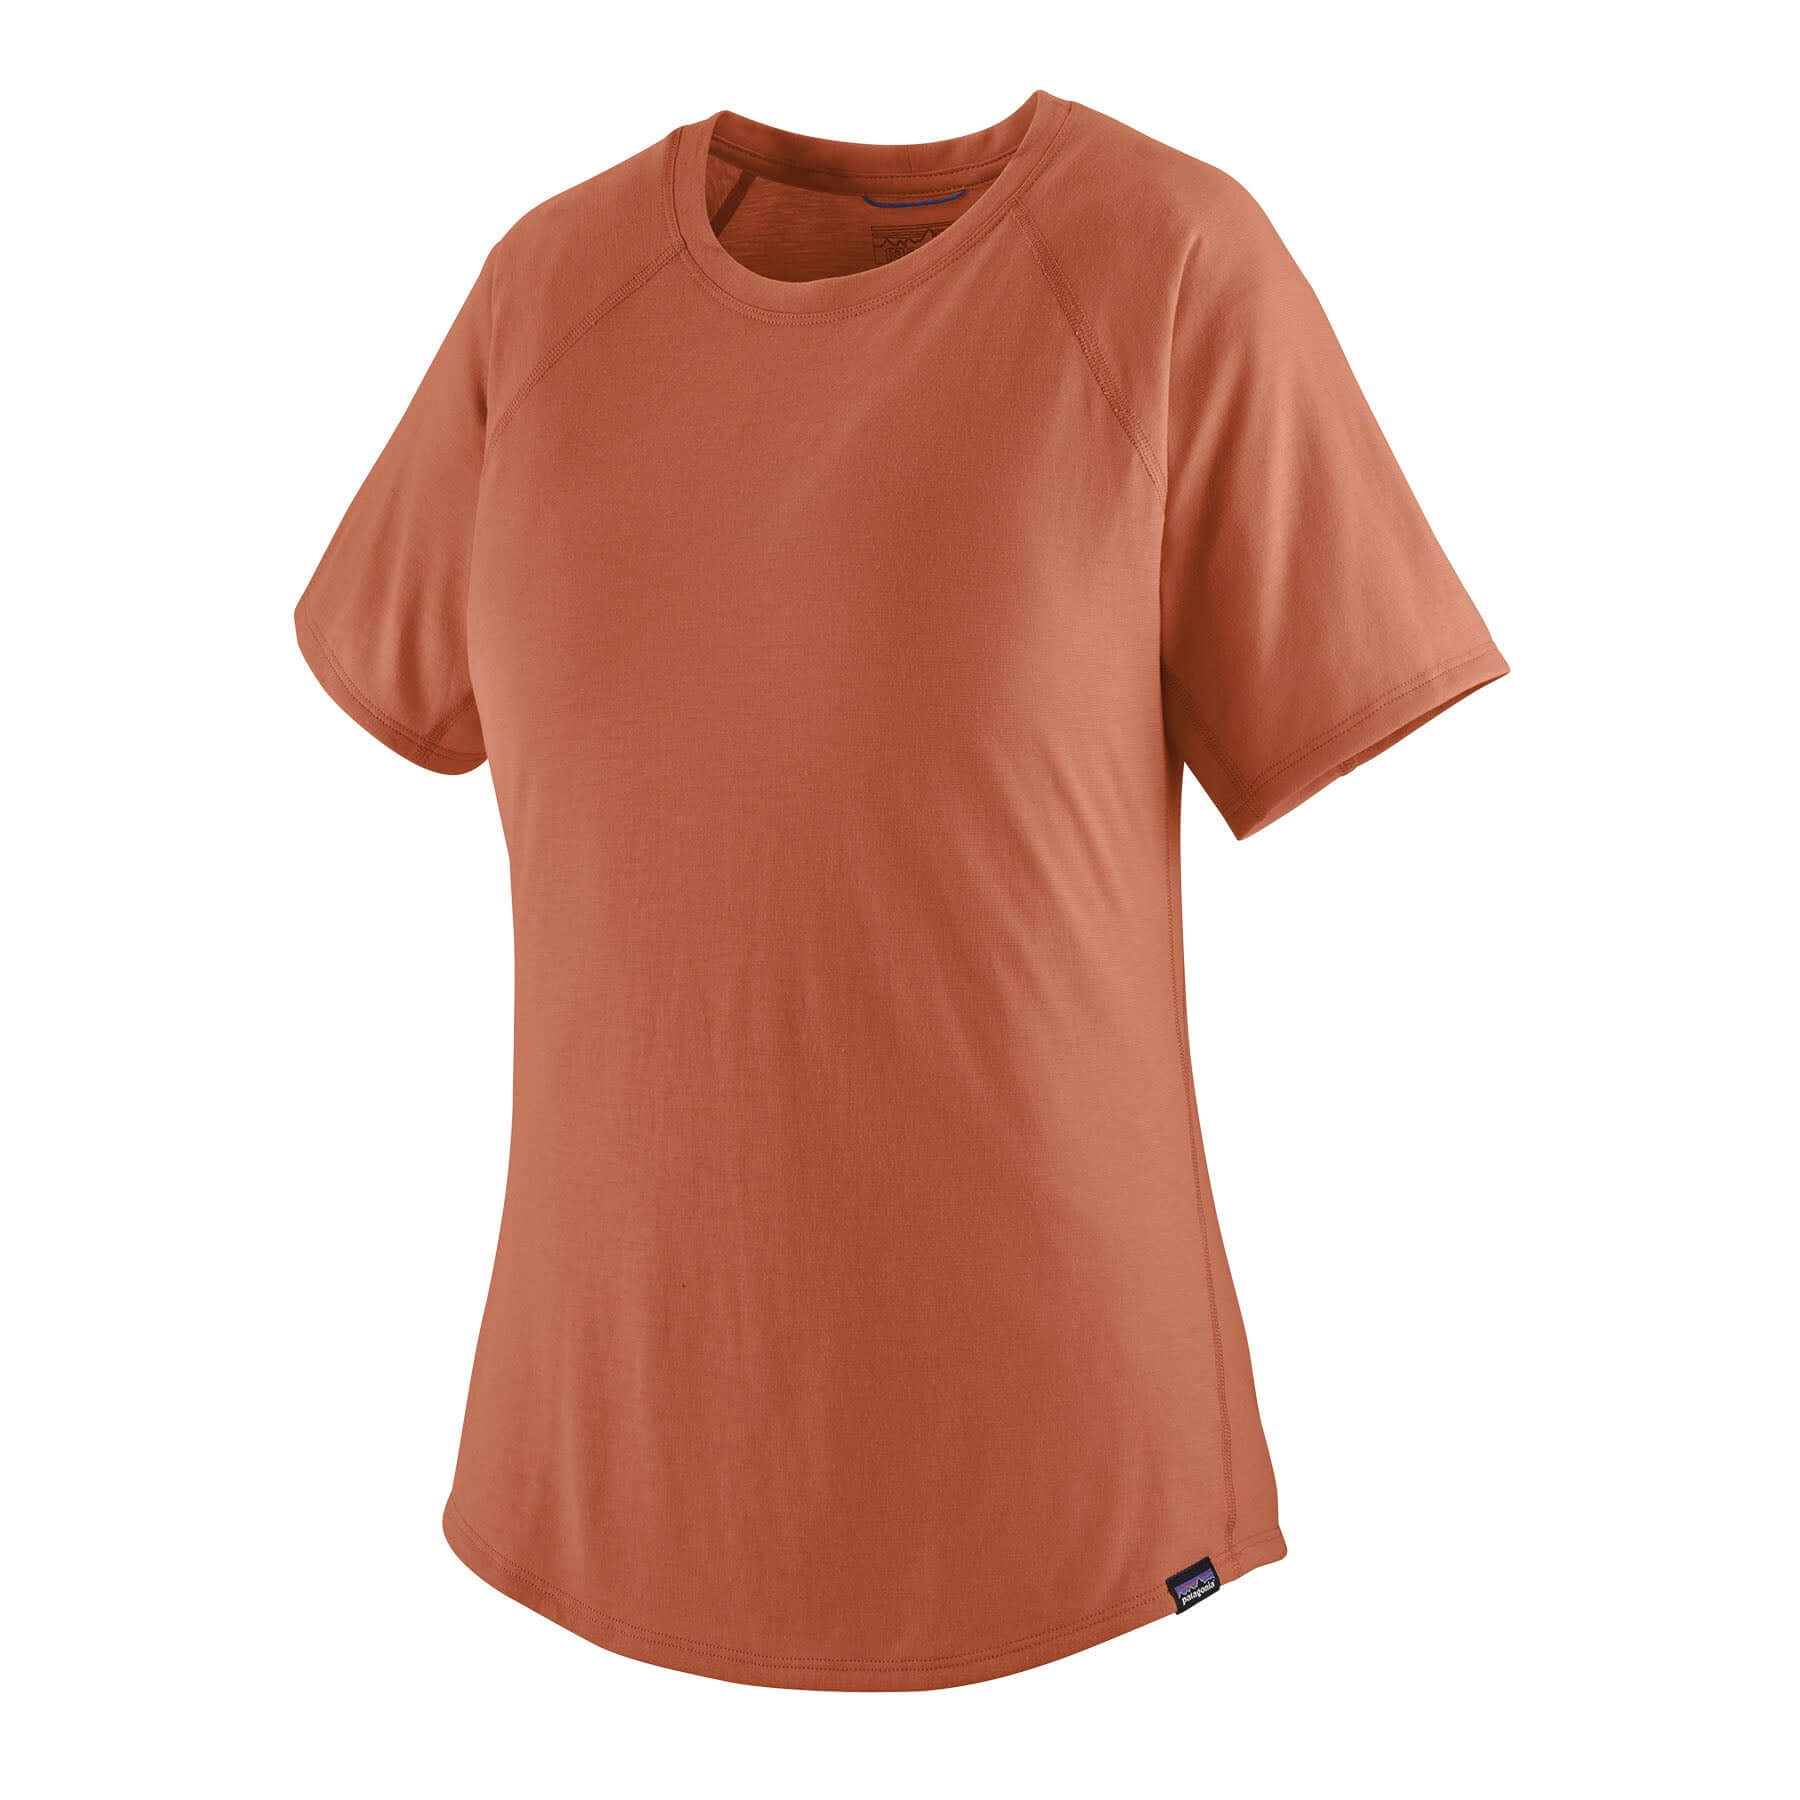 Women's Capilene® Cool Trail Shirt in Sienna Clay | Patagonia Bend